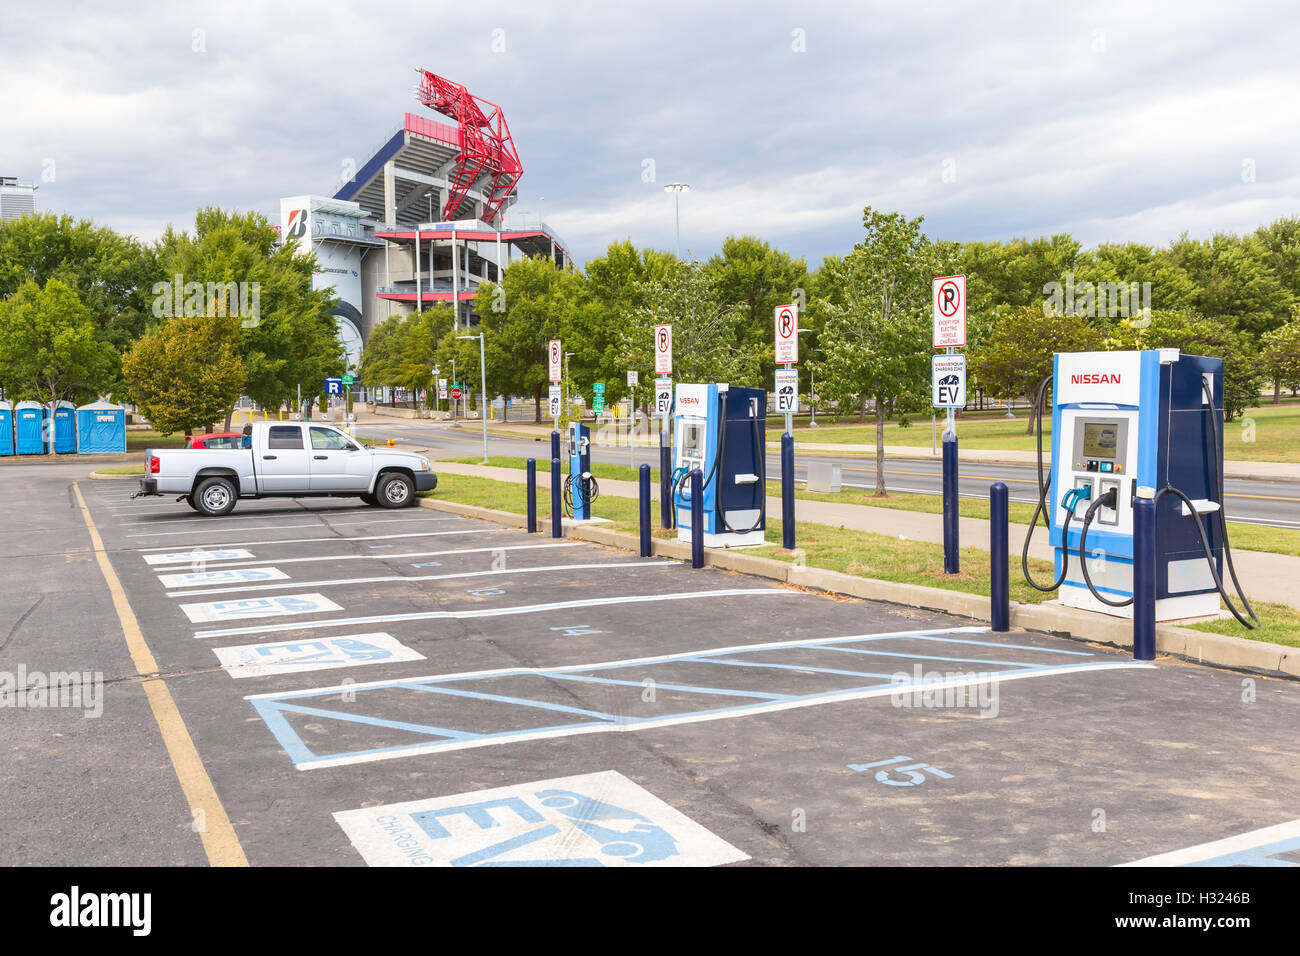 The Nissan Stadium Charging Zone, for electric vehicle charging, in a parking lot for Nissan Stadium in Nashville, Tennessee. Stock Photo